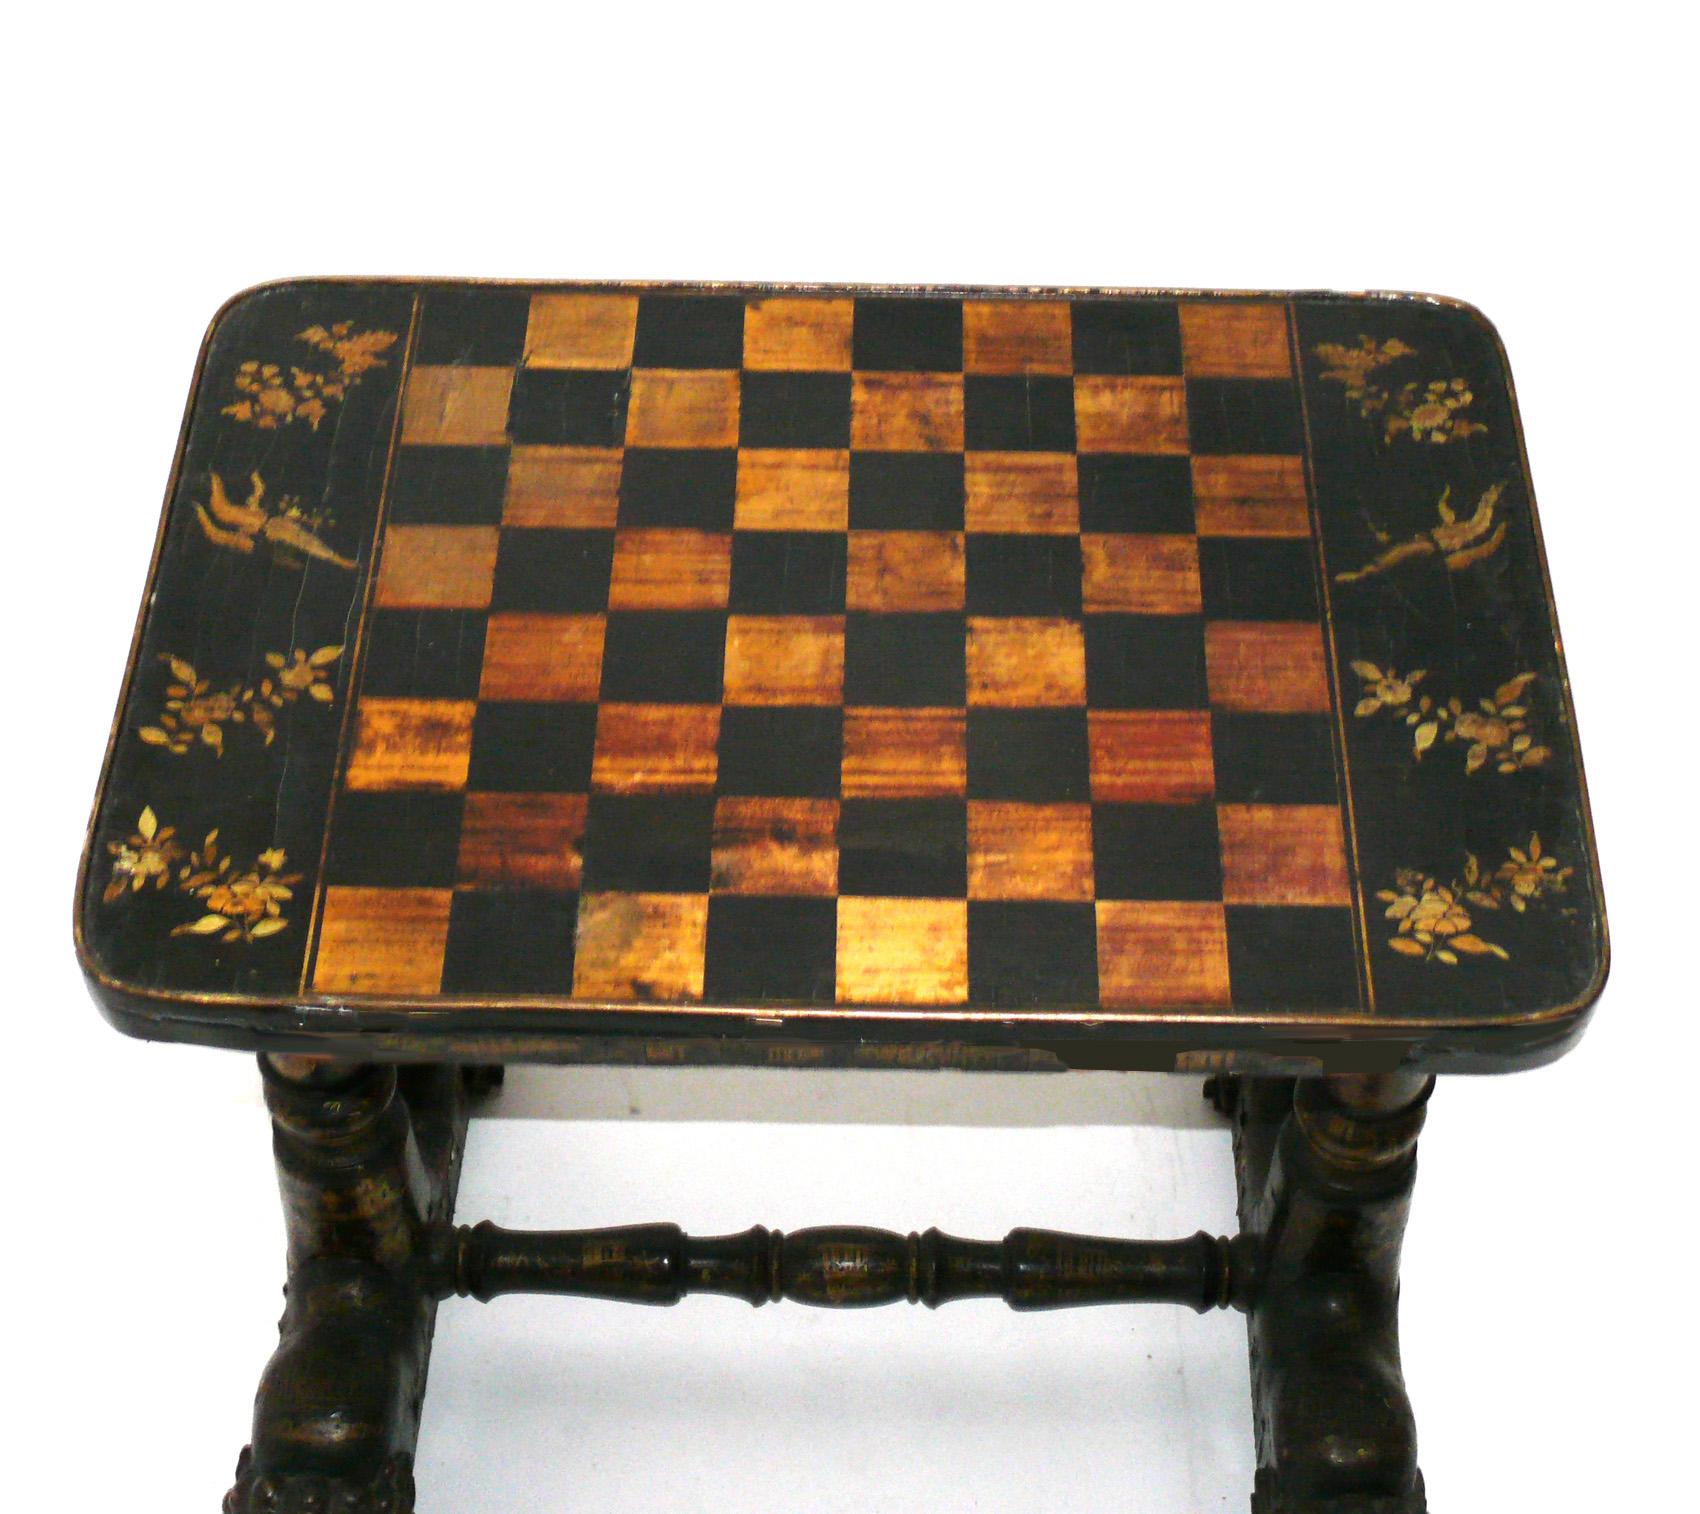 Chinoiserie Lacquered and Parcel Gilt Game Table, probably Chinese, at least circa 1940s, possibly much earlier. Retains warm original patina. It is a versatile size and can be used as a game table, lamp table, end or side table, or as a nightstand.